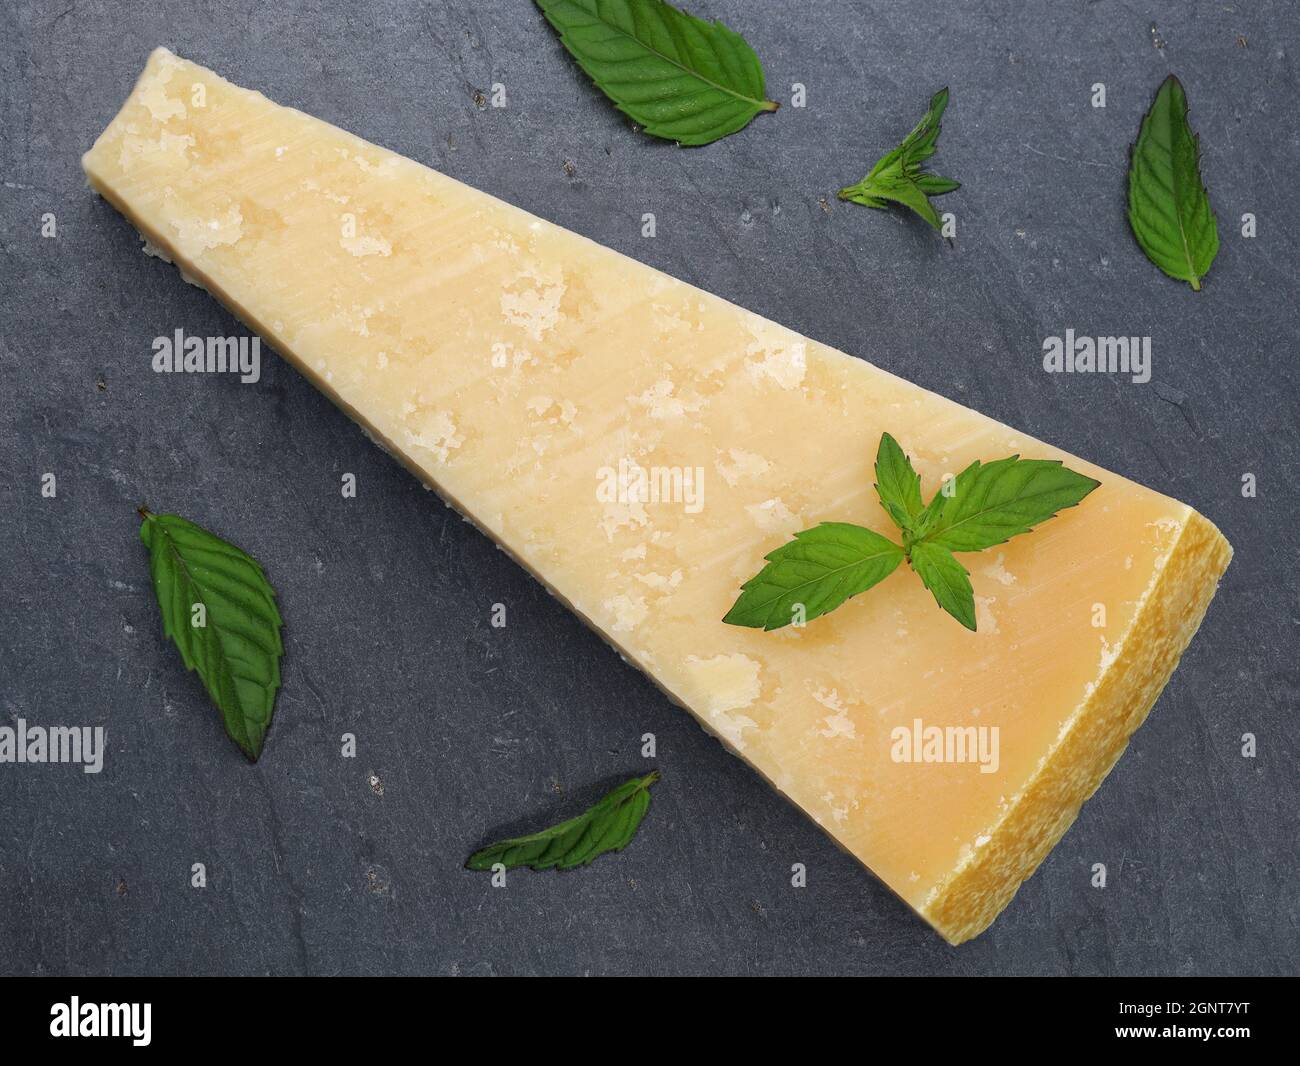 Top view of piece of parmigiano reggiano or parmesan cheese on dark slate plate with green mint leaves Stock Photo